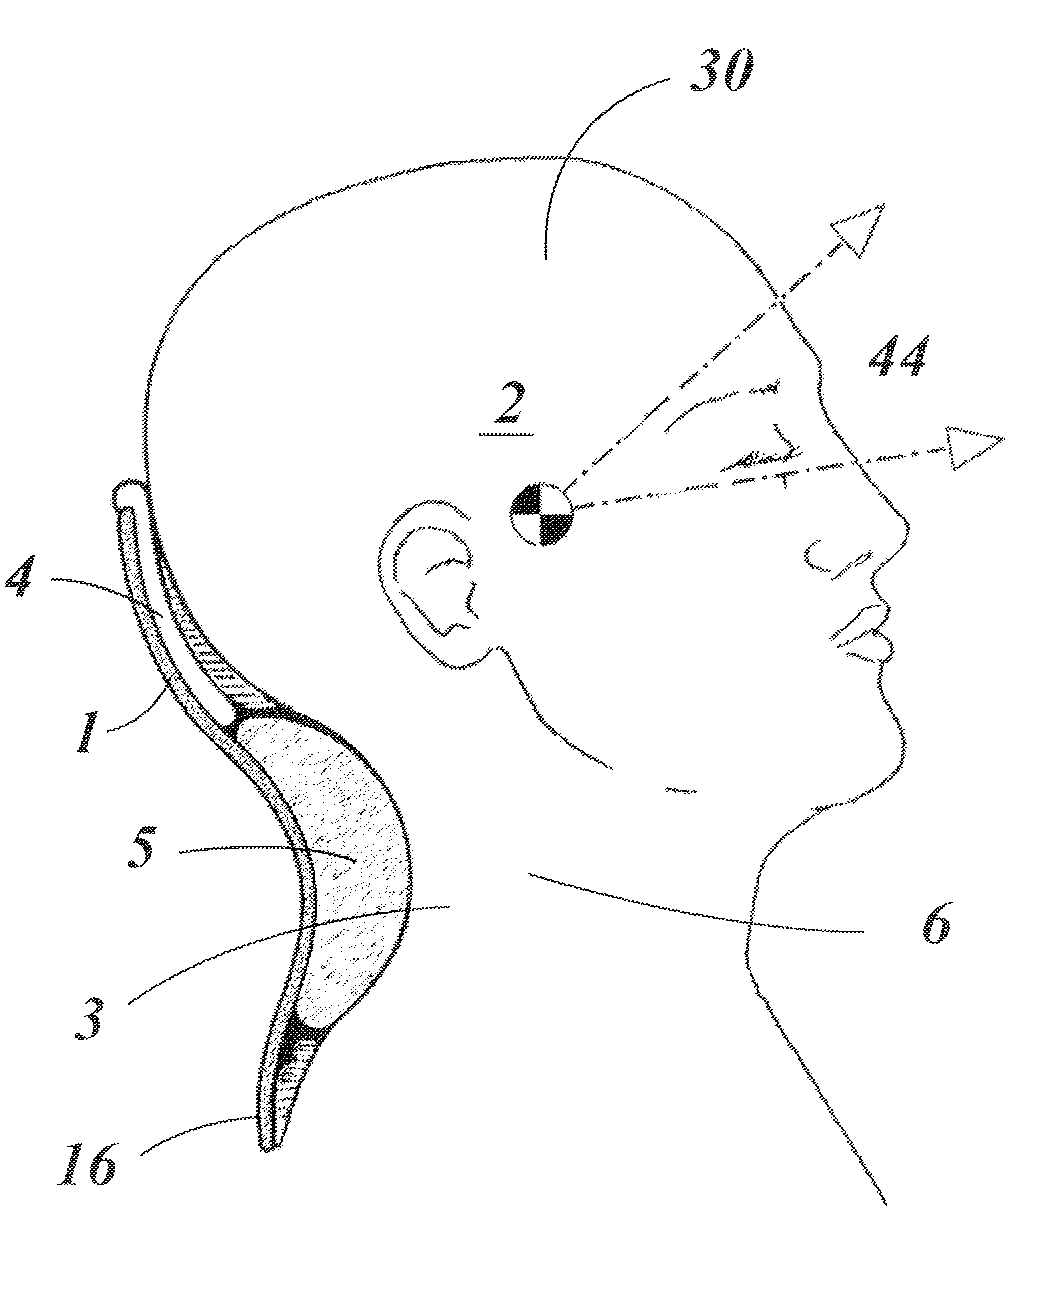 Travel pillow providing head and neck alignment during use